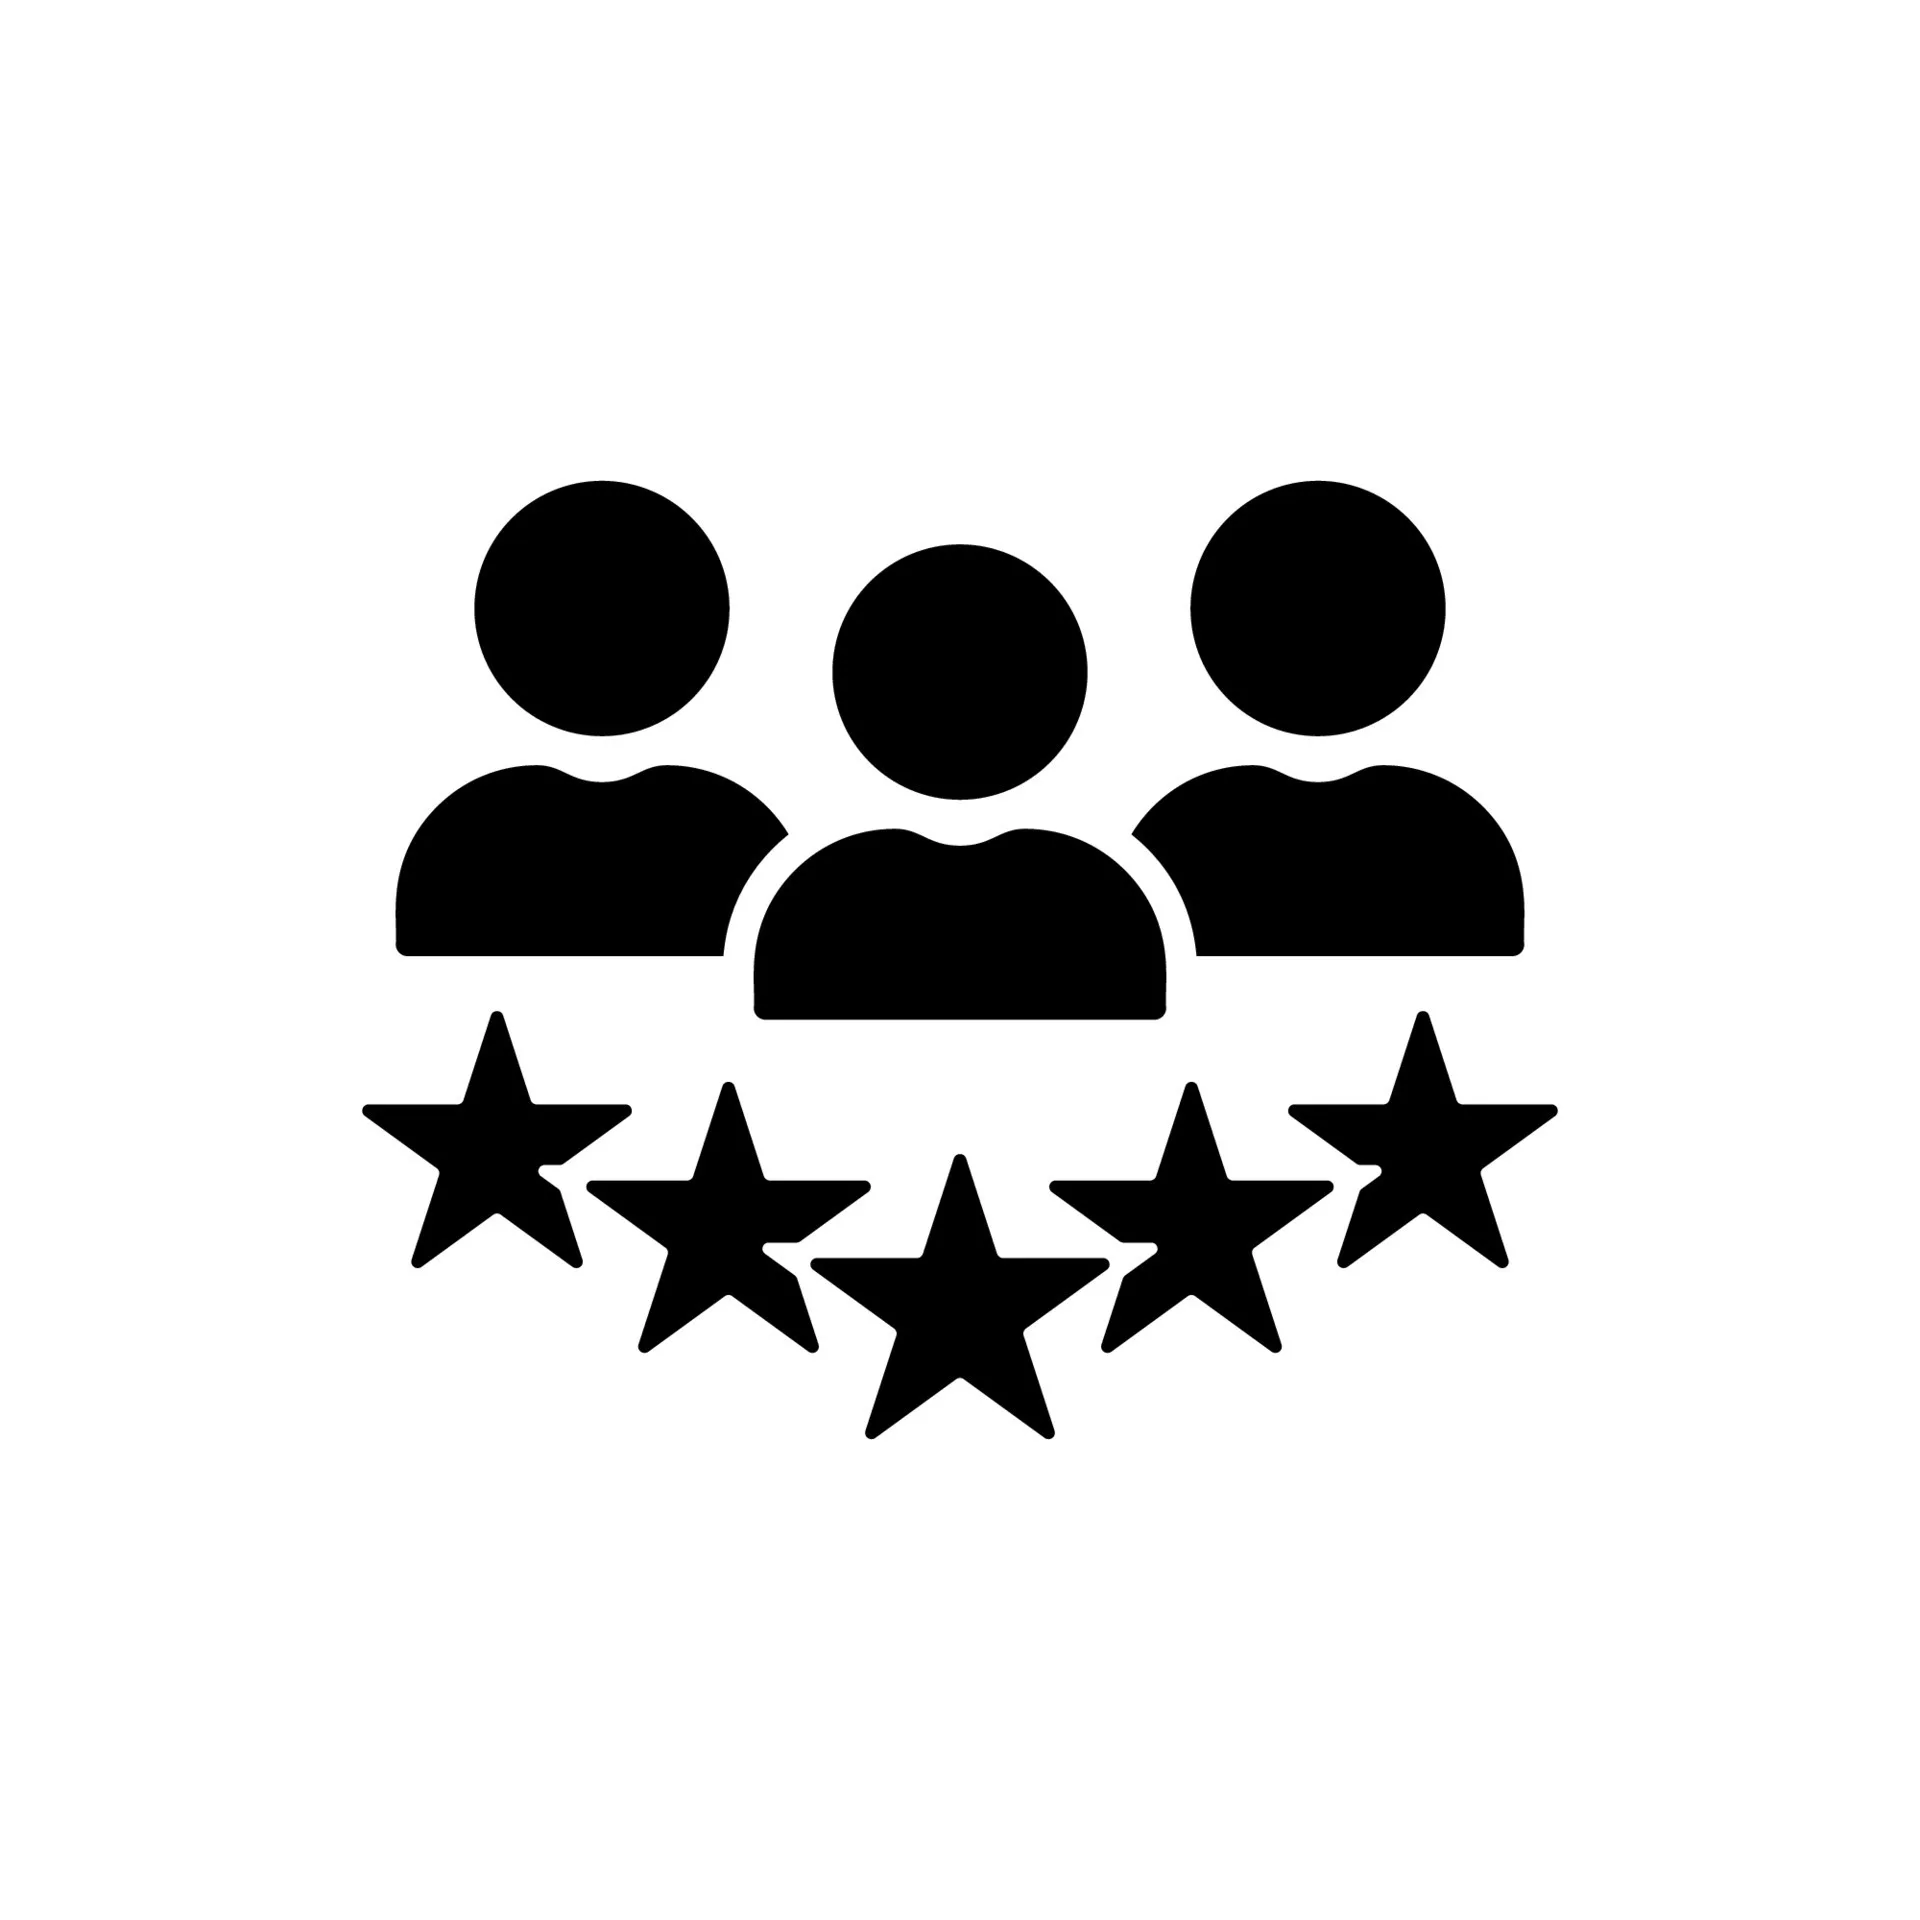 experience-qualification-team-black-icon-satisfaction-user-customer-service-review-silhouette-pictogram-good-quality-happy-client-high-quality-icon-isolated-illustration-vector